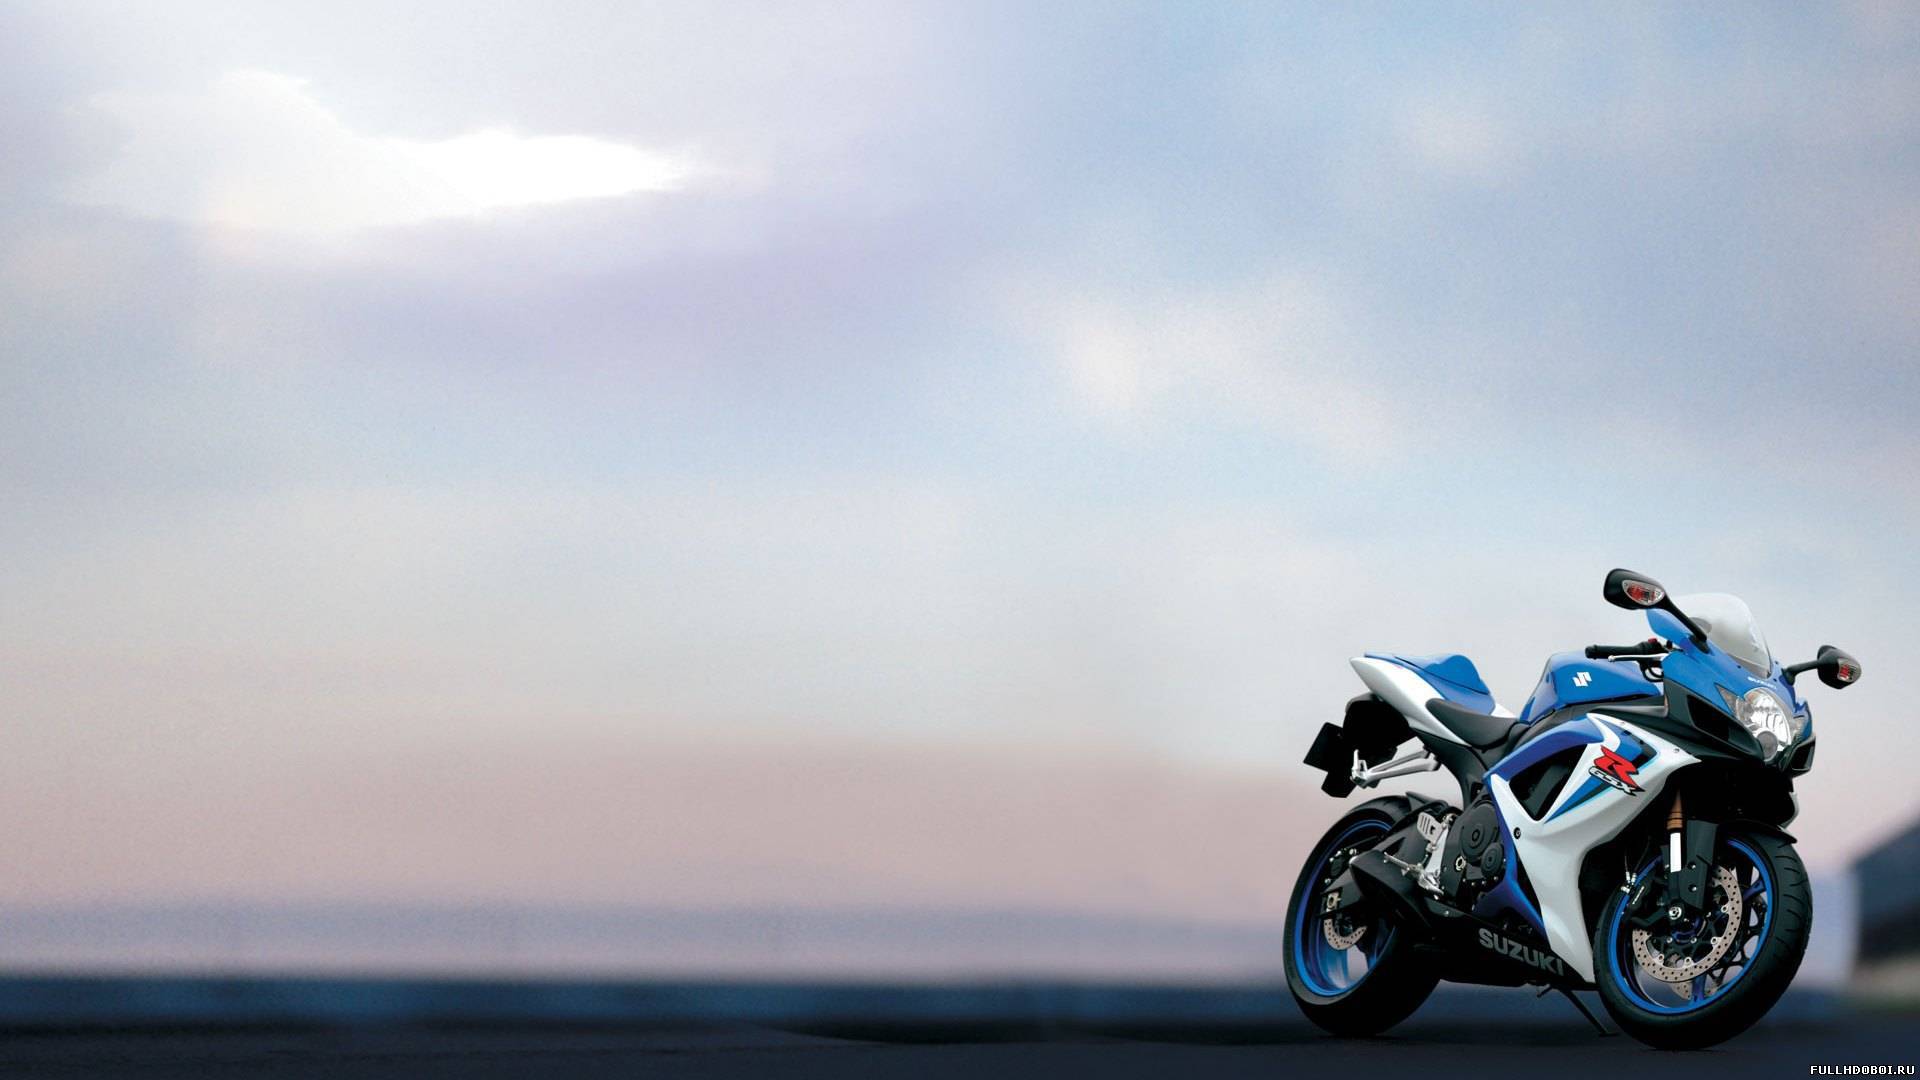 Beautiful bike Suzuki GSX R 600 wallpapers and images - wallpapers